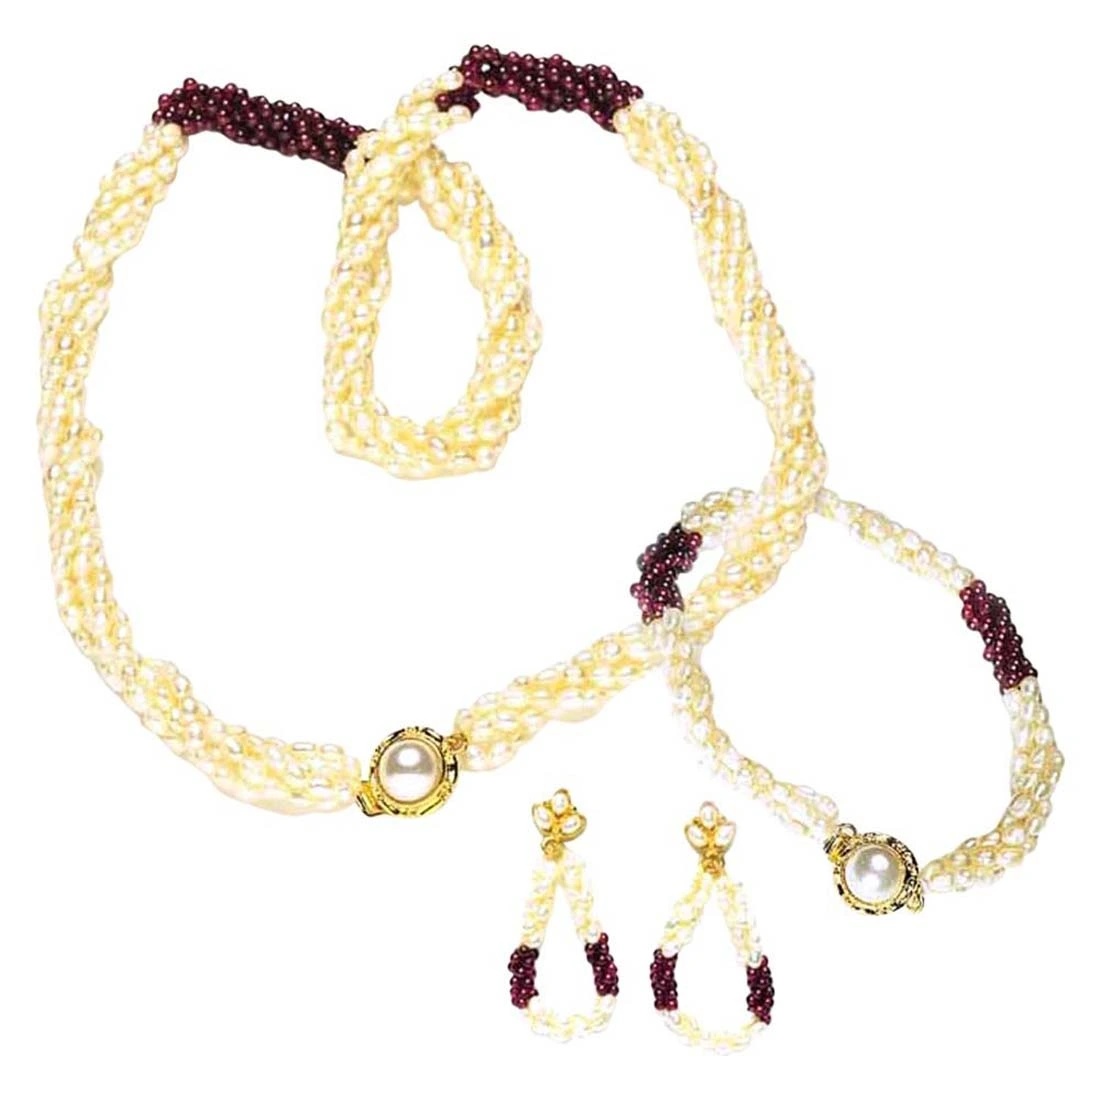 Enthralling Beauty - 3 Line Twisted Real Rice Pearl & Red Garnet Beads Necklace, Earring & Bracelet Set for Women (SP98)